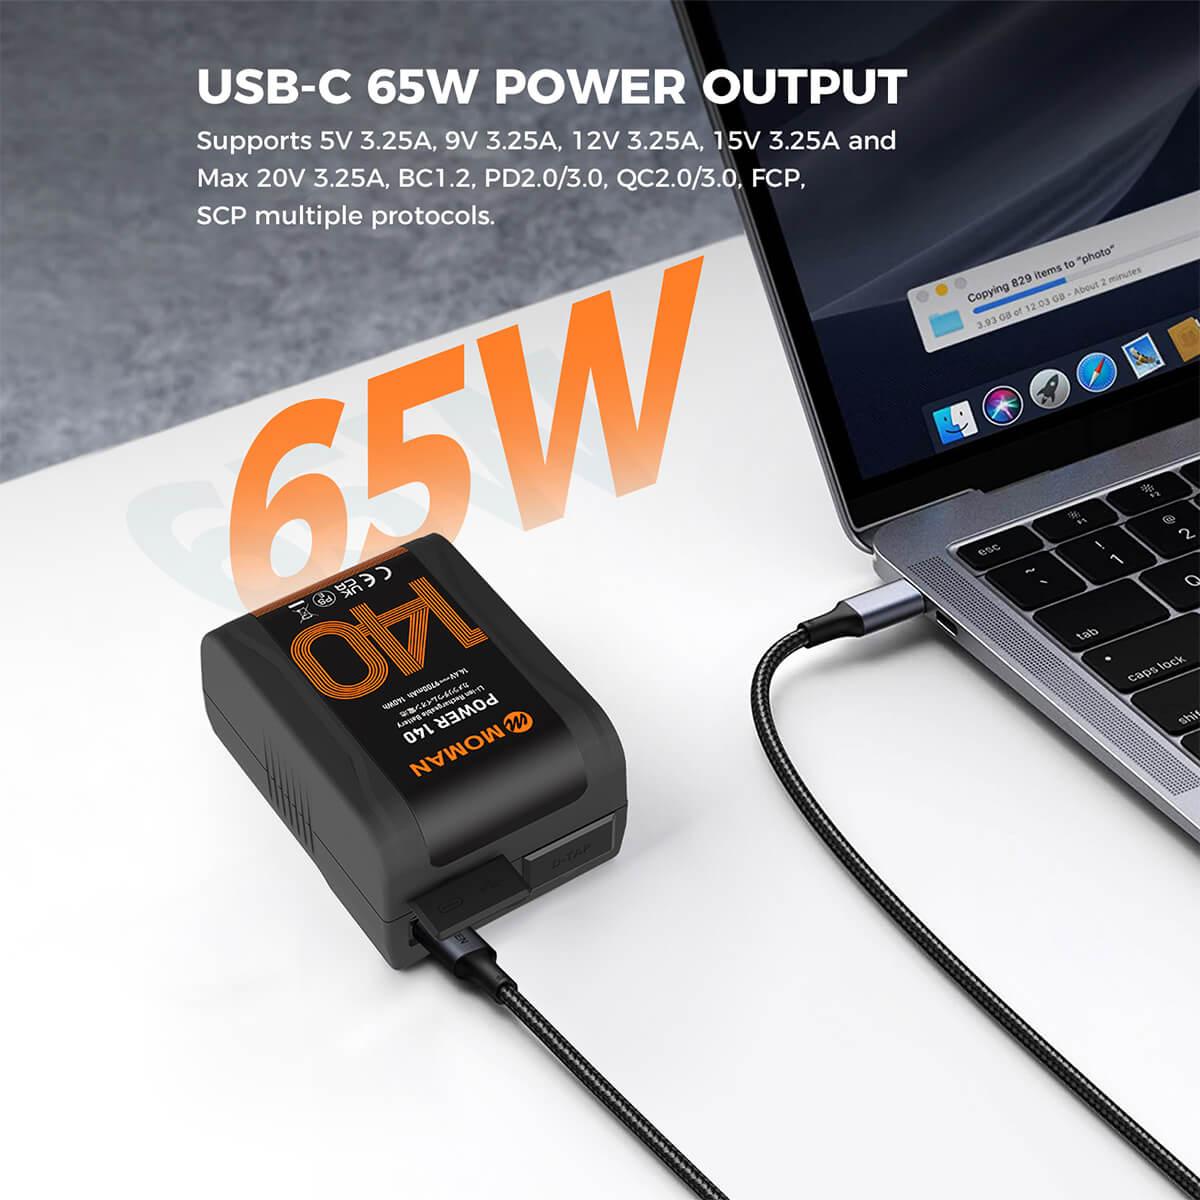 Moman Power 140 Red Raven v mount battery features a USB-C 65W power output. It has lots of applicable scenarios, charging laptops, cameras, camcorders, so on.